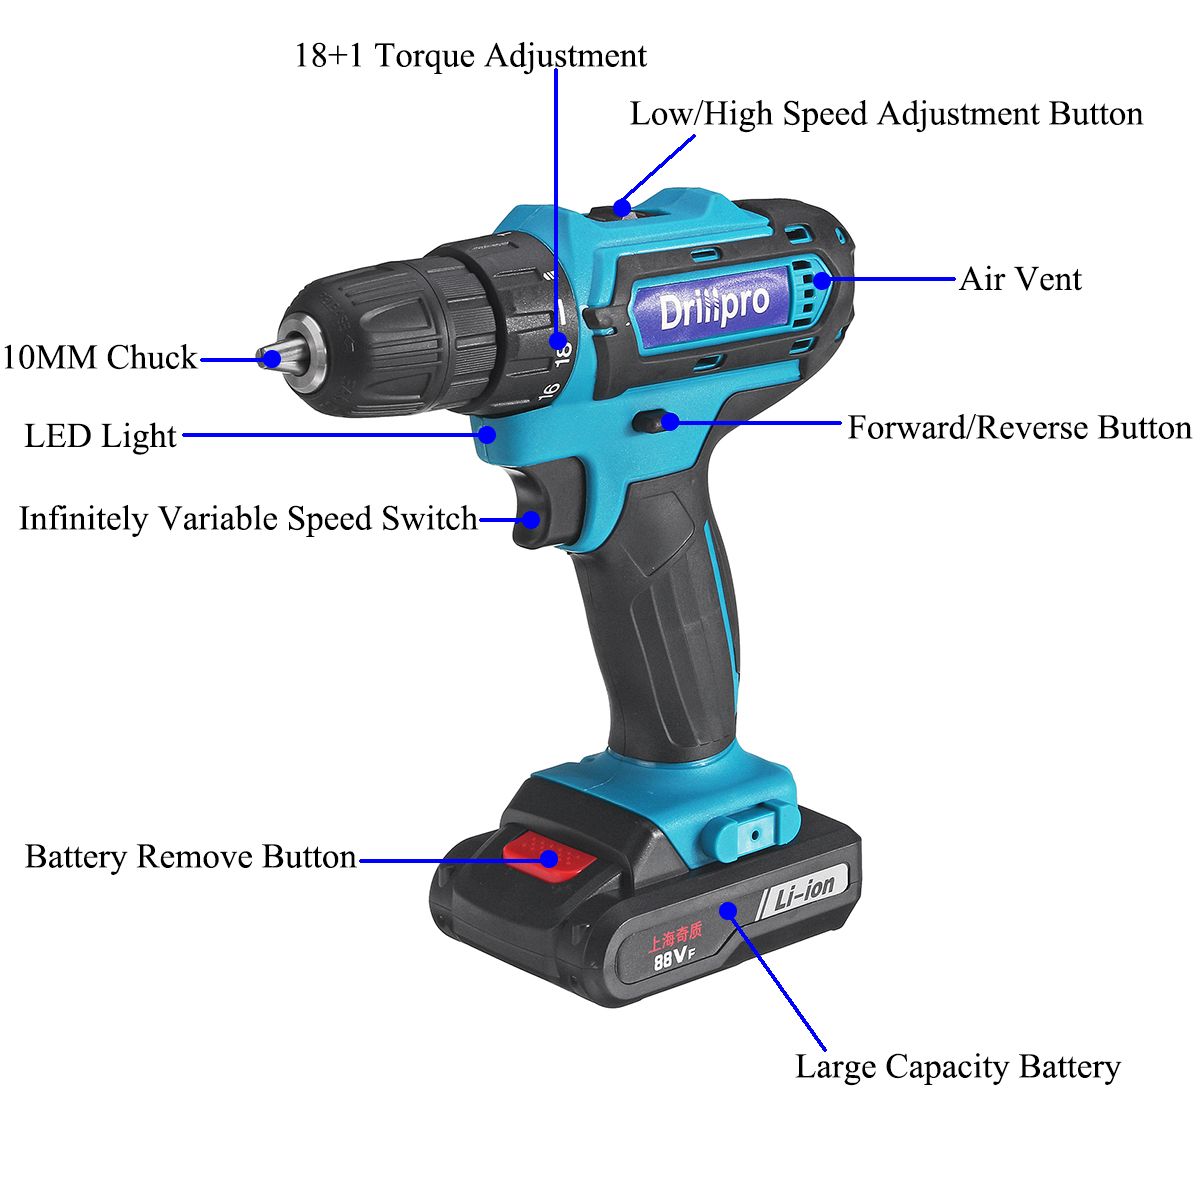 Drillpro-88VF-Cordless-Electric-Drill-Set-Rechargeable-Power-Screwdriver-181-Torque-W-2-Li-ion-Batte-1511982